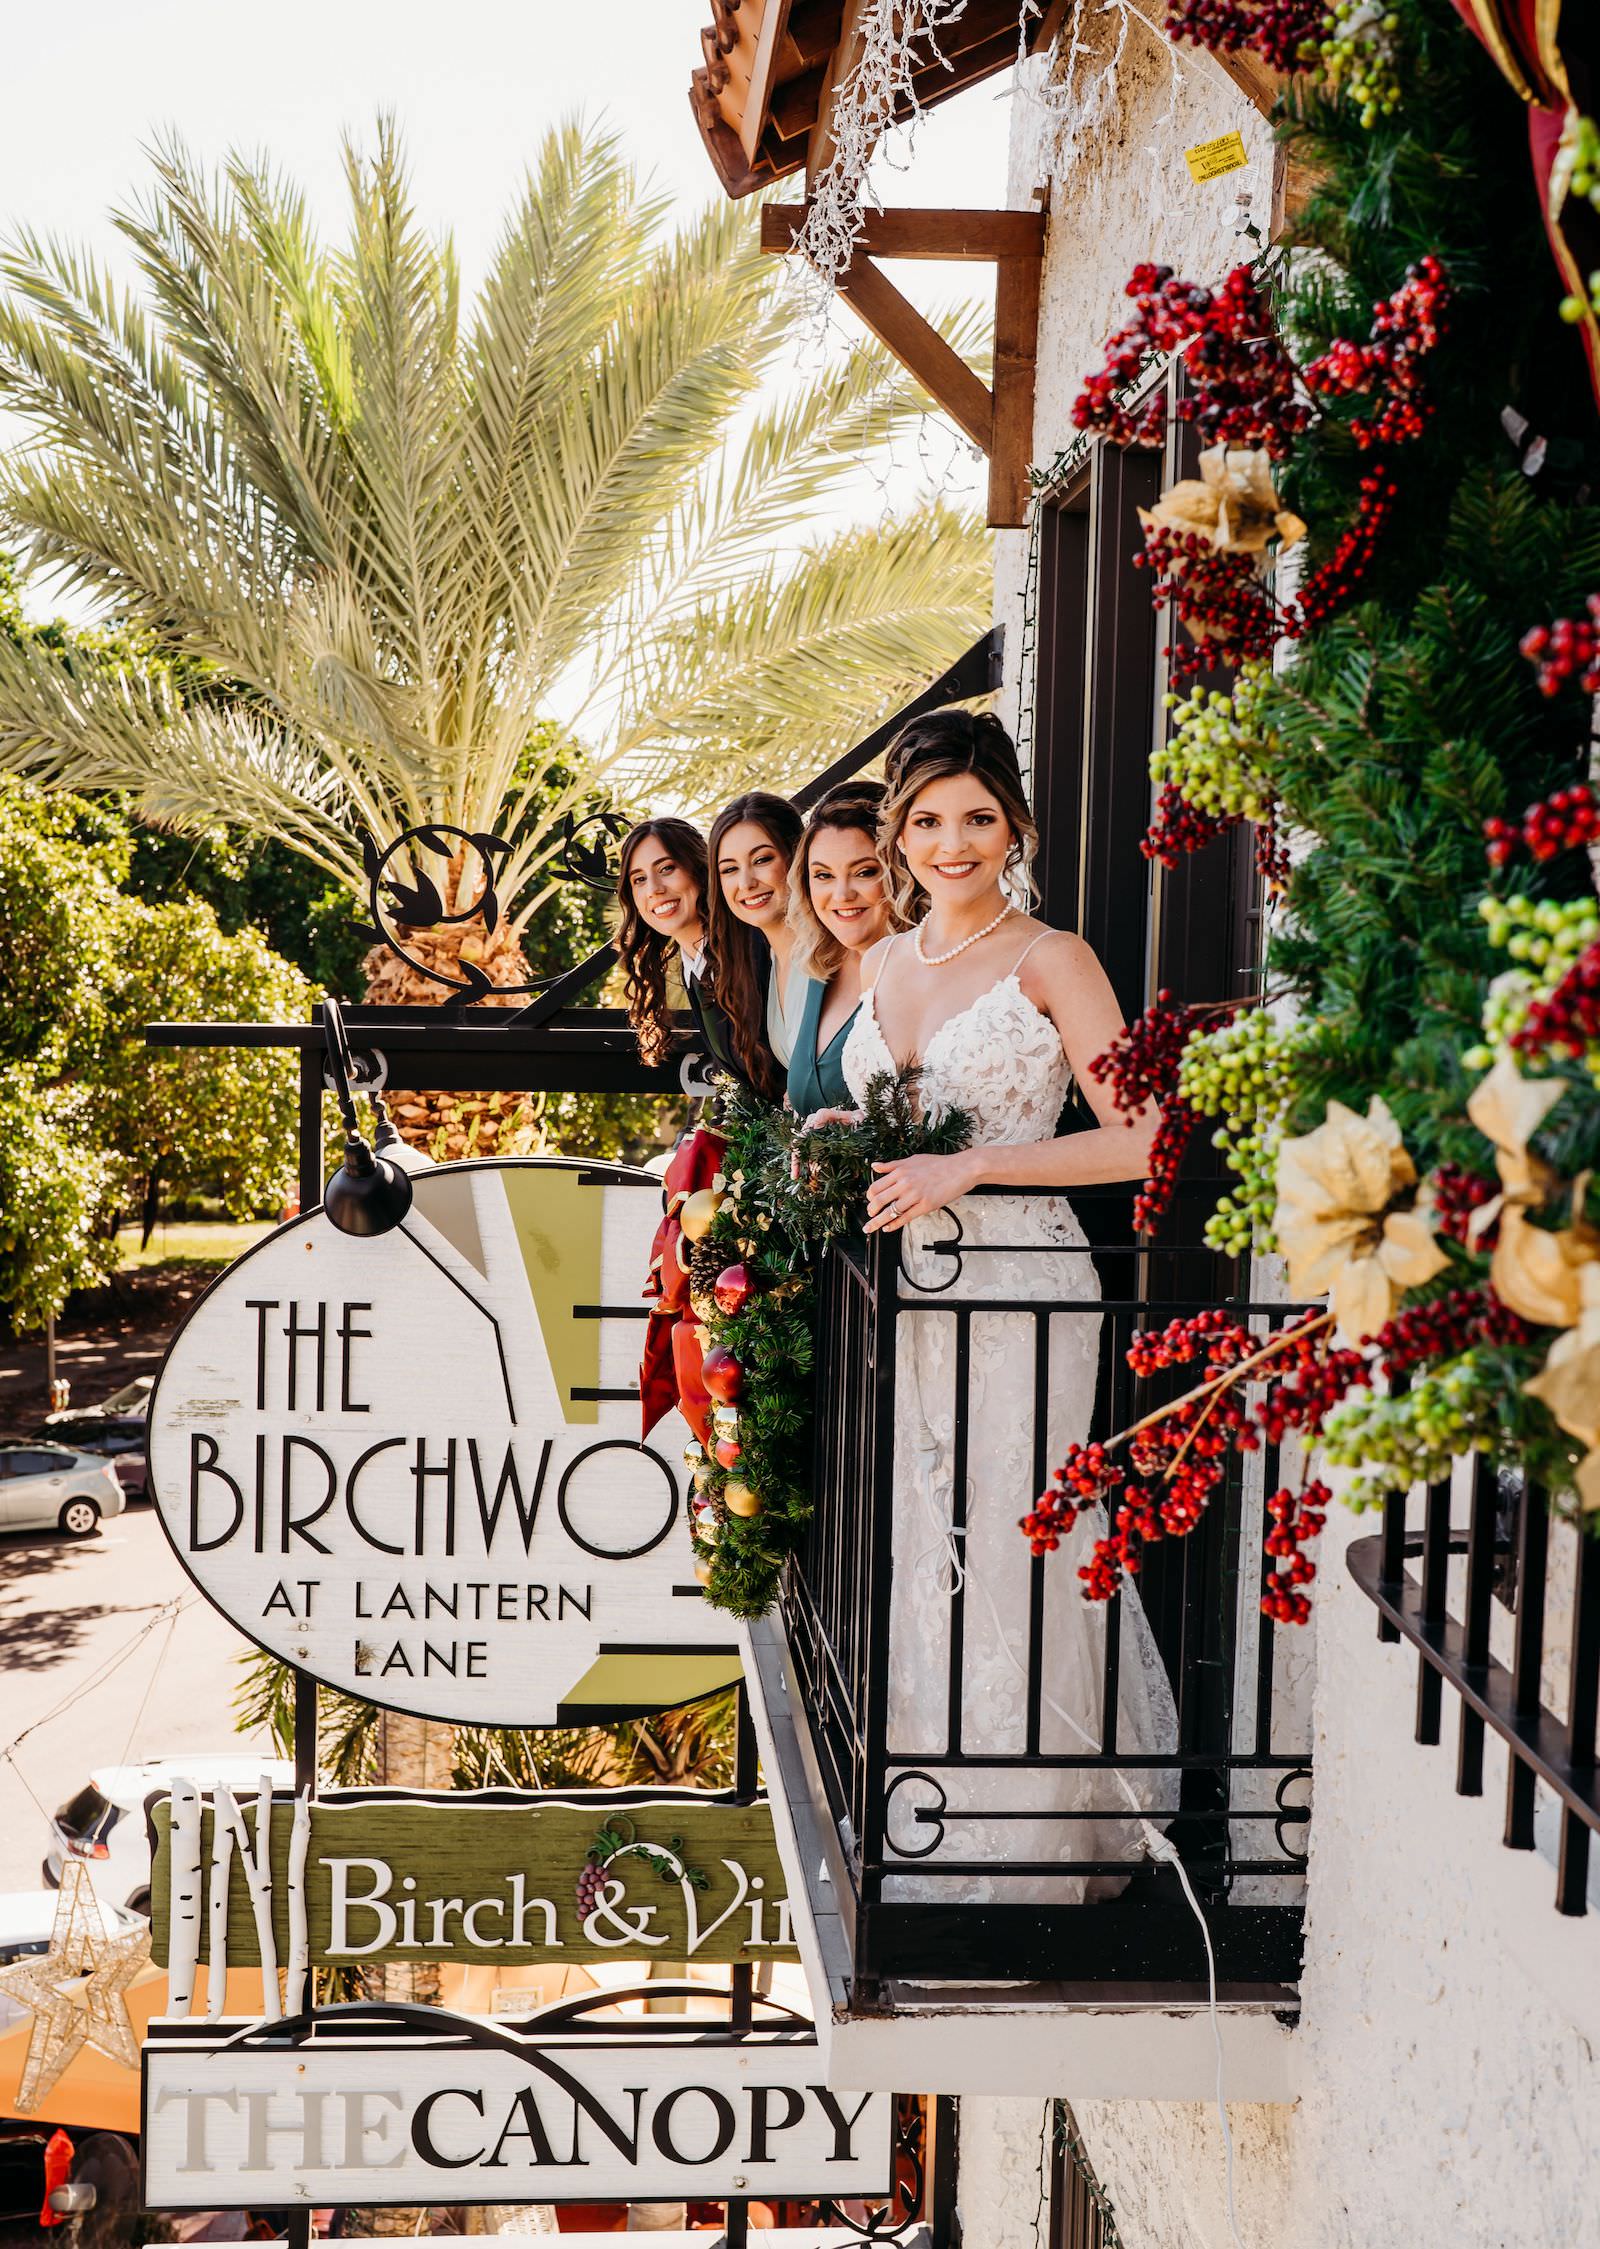 Bride and Bridesmaids on Balcony of St. Pete Wedding Venue The Birchwood | Tampa Bay Wedding Hair and Makeup Adore Bridal